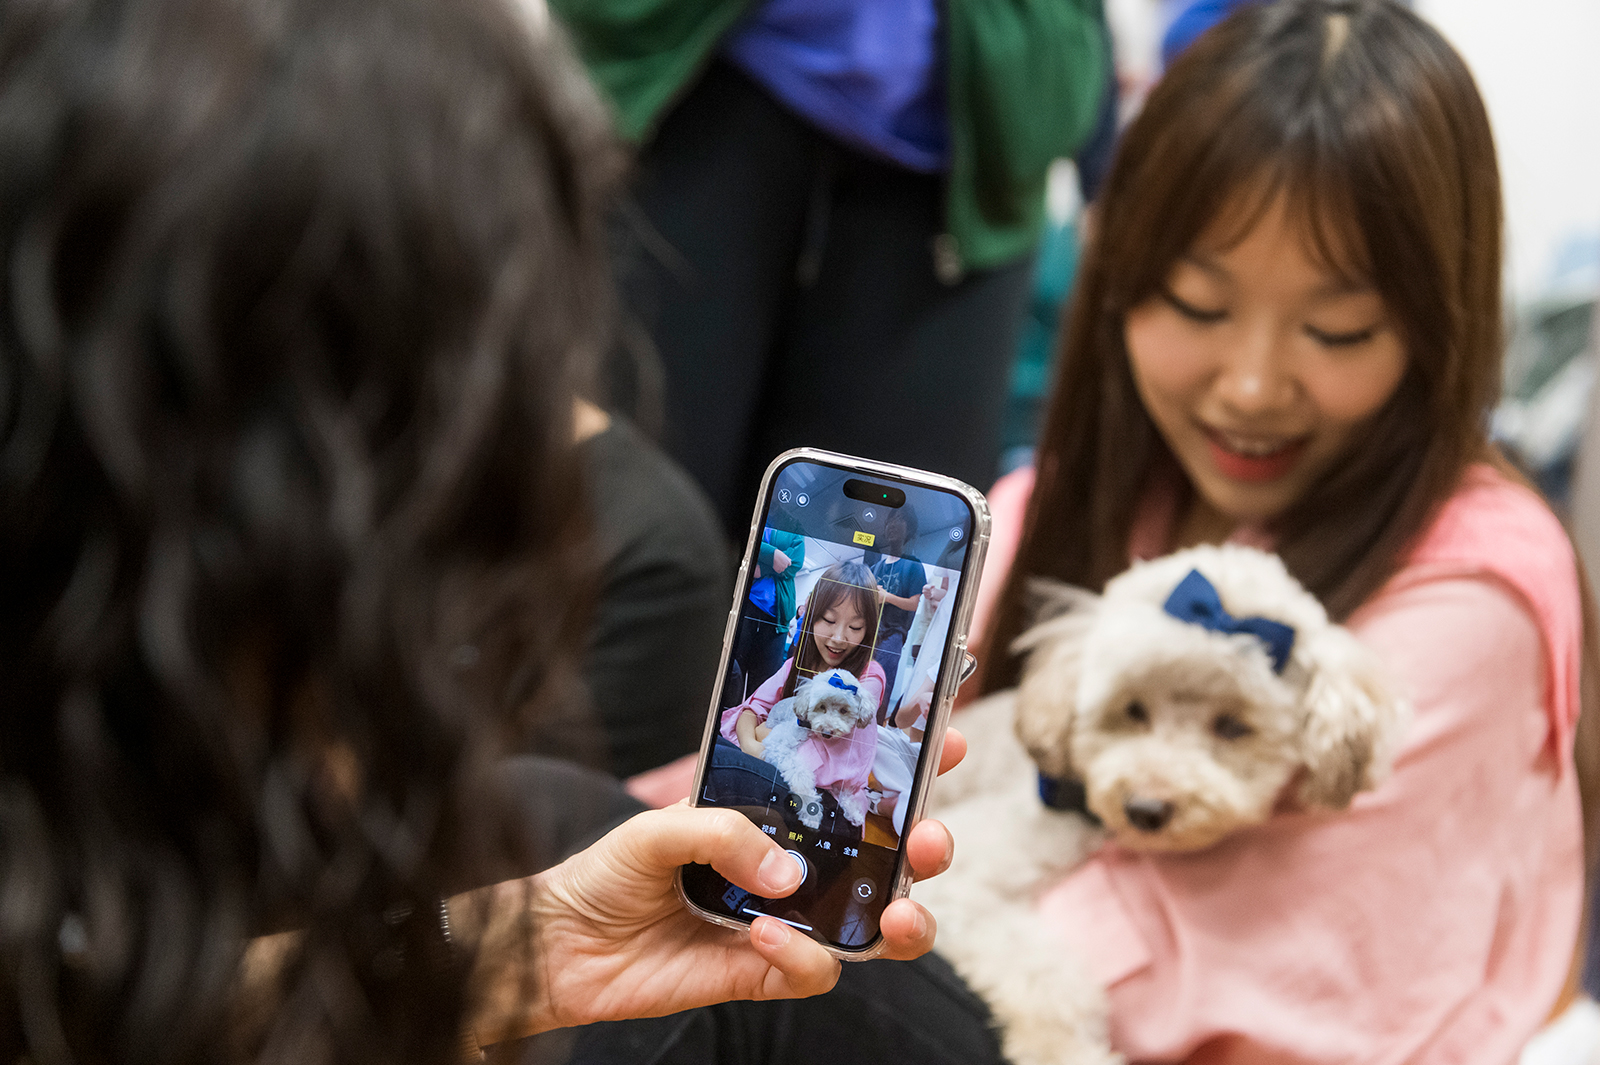 About 100 CityU students joined the event and met with “Professor Paws”.